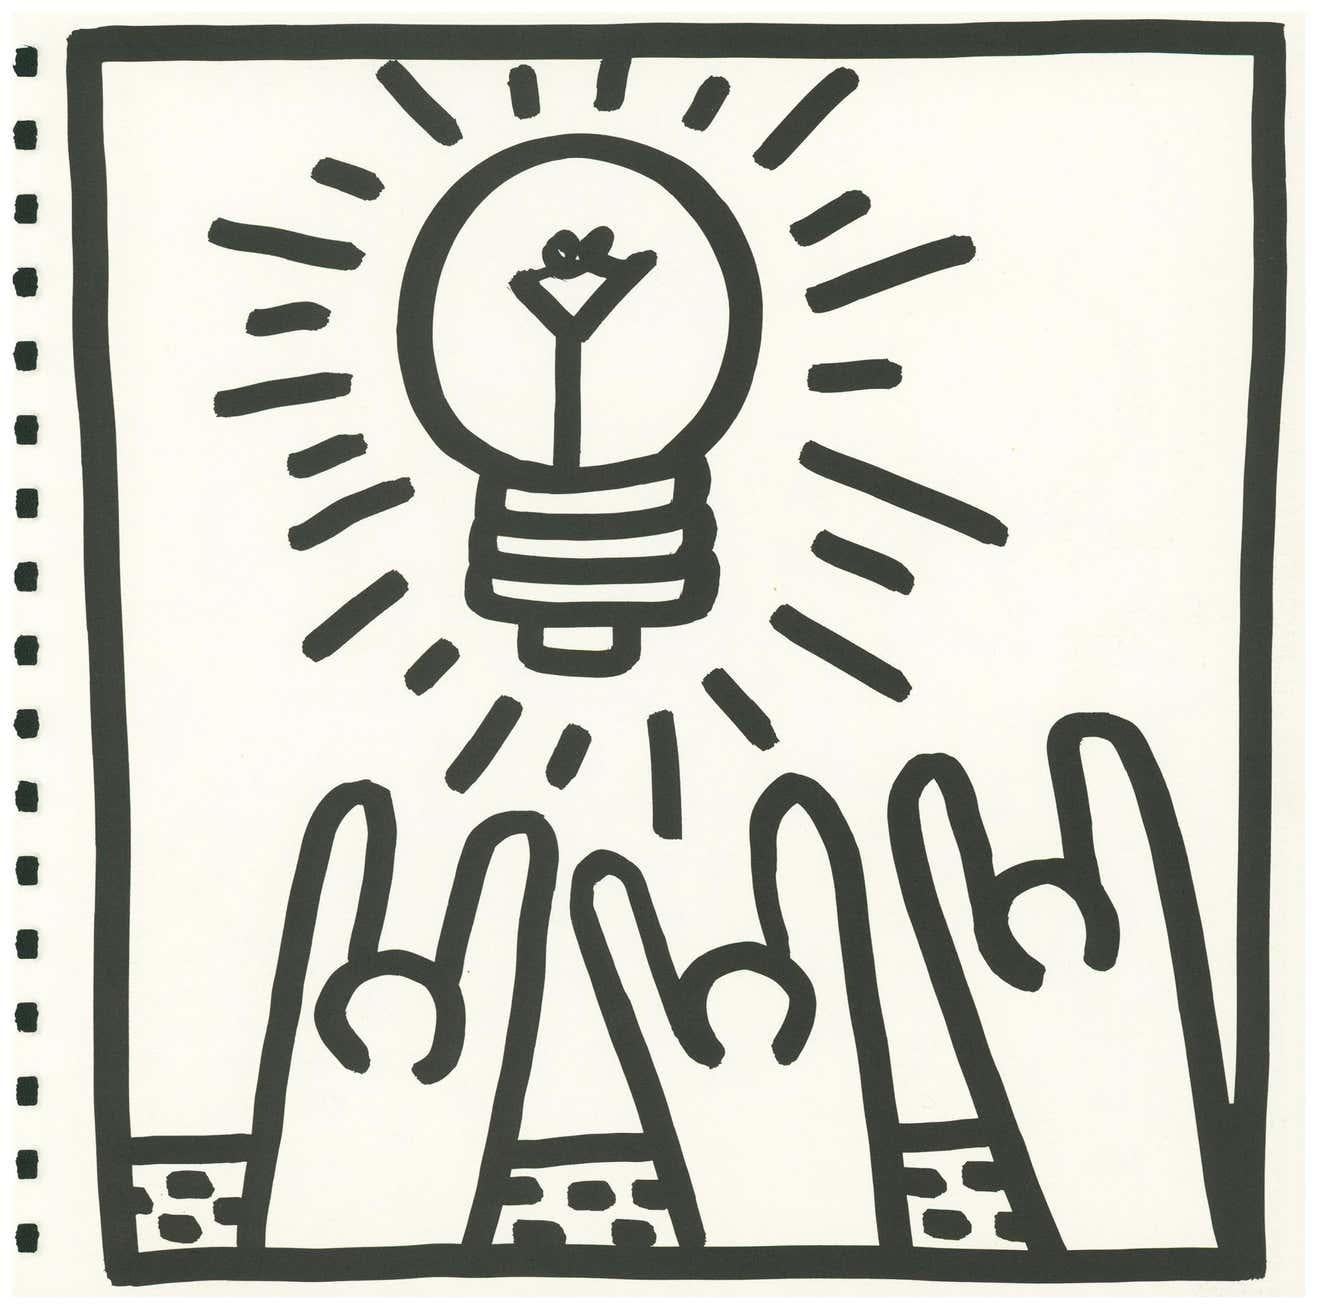 Keith Haring (untitled) pyramid lithograph 1982 (Keith Haring prints) - Contemporary Print by (after) Keith Haring